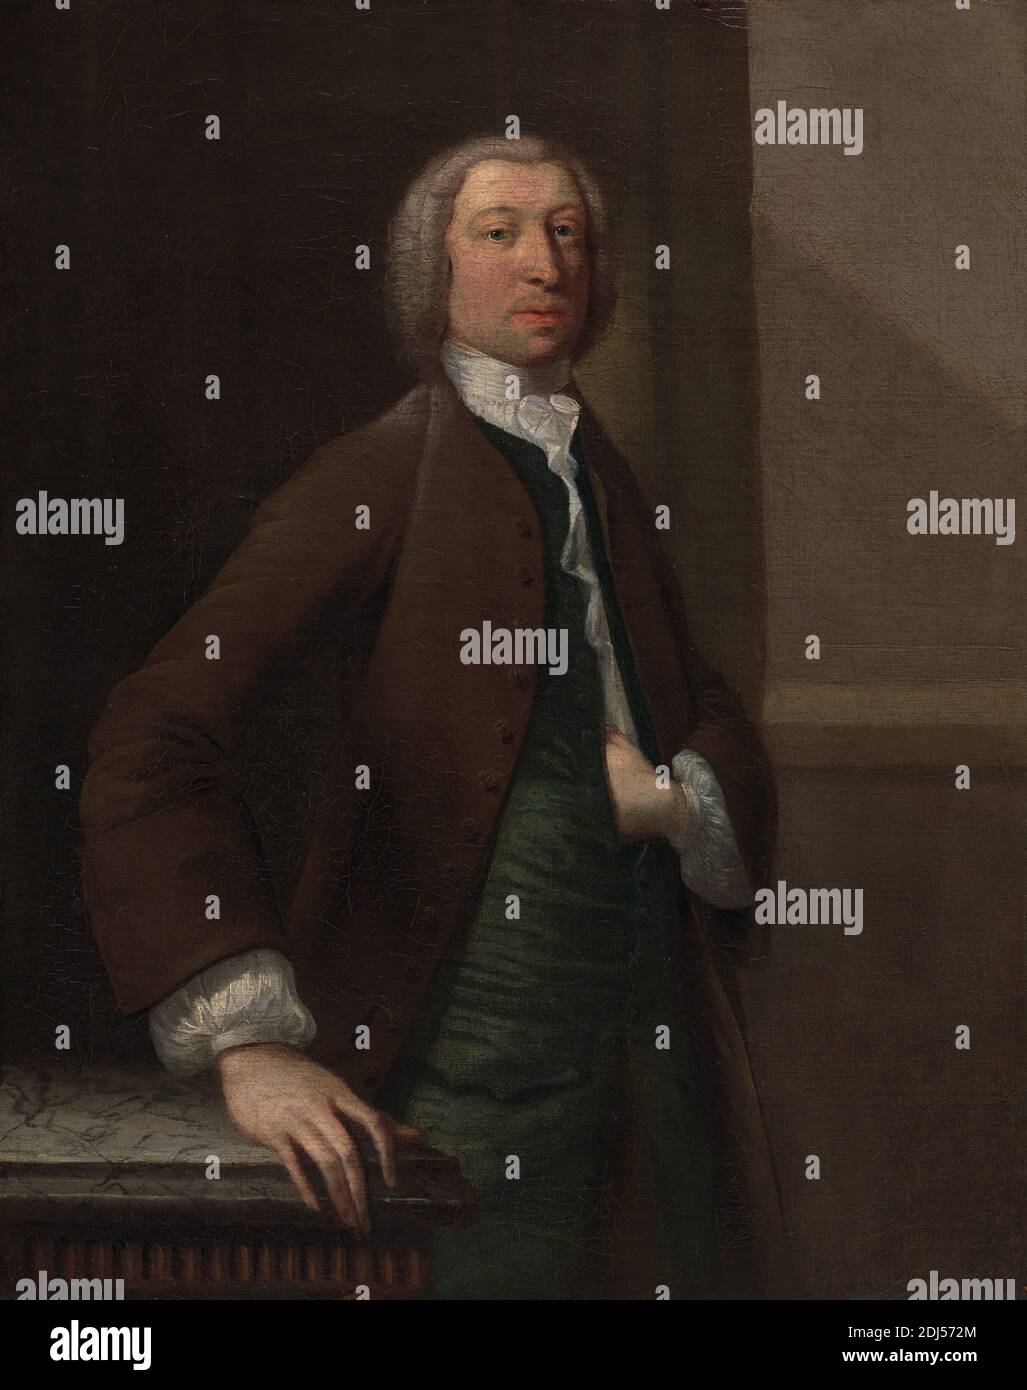 Portrait of a Man, called Tobias Smollett, Attributed to Robert Scaddon, active 1743–1774, British, Formerly unknown artist, eighteenth century, Formerly Francis Hayman, 1707/8–1776, British, ca. 1750, Oil on canvas, Support (PTG): 17 x 13 1/2 inches (43.2 x 34.3 cm), coat, costume, cravat, hairstyles, hands, man, neckwear, portrait, ruffle, sleeves, gigot, standing, waistcoat, wig Stock Photo